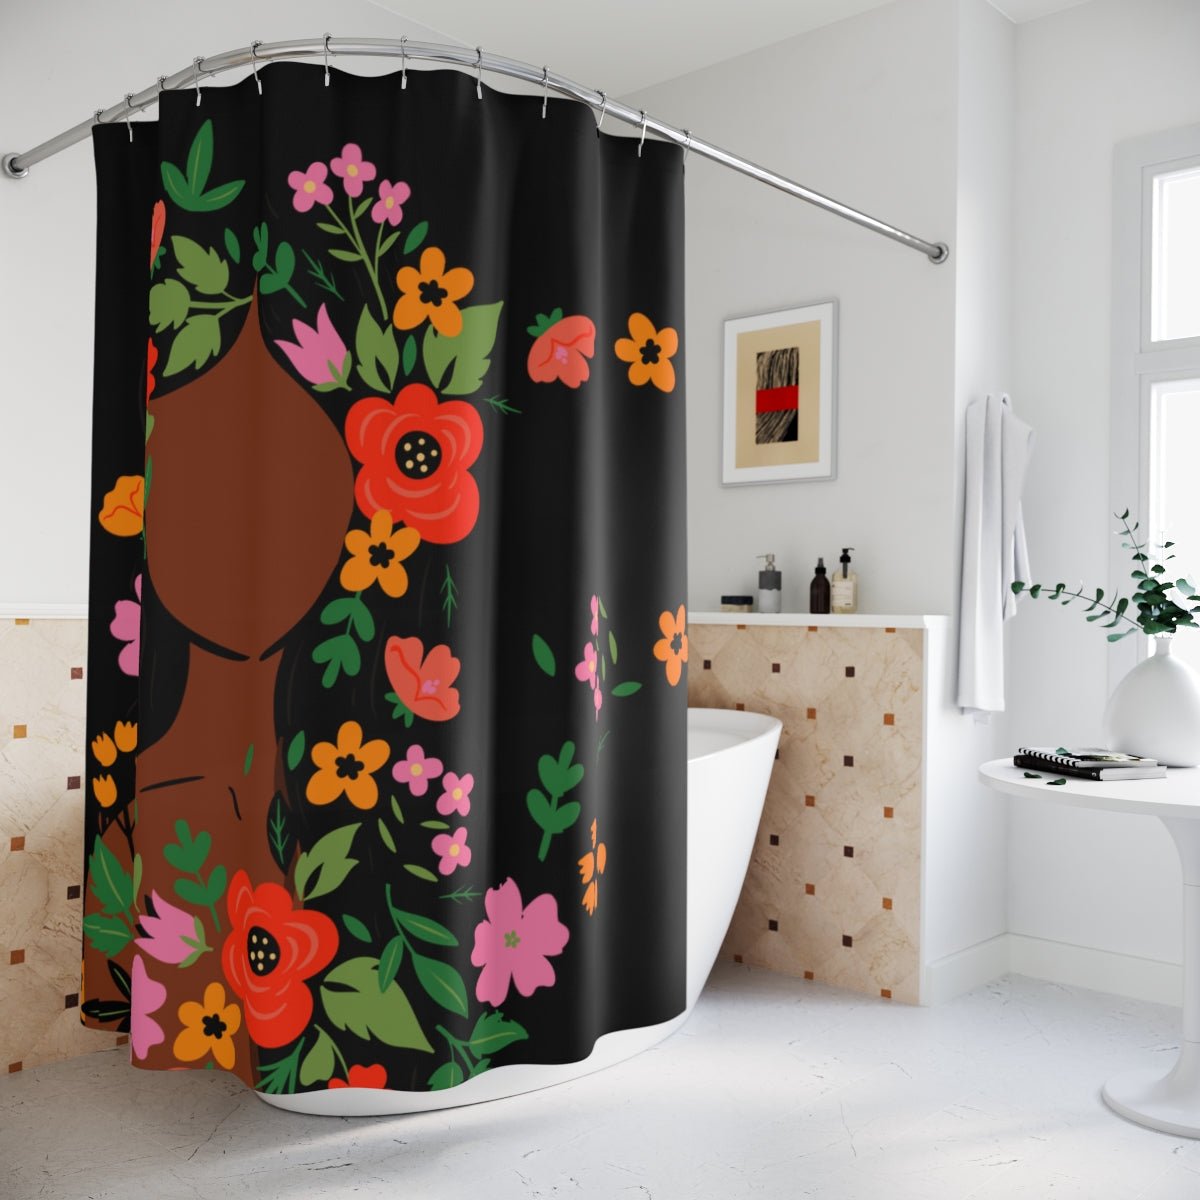 Floral Woman Shower Curtain - The Trini Gee